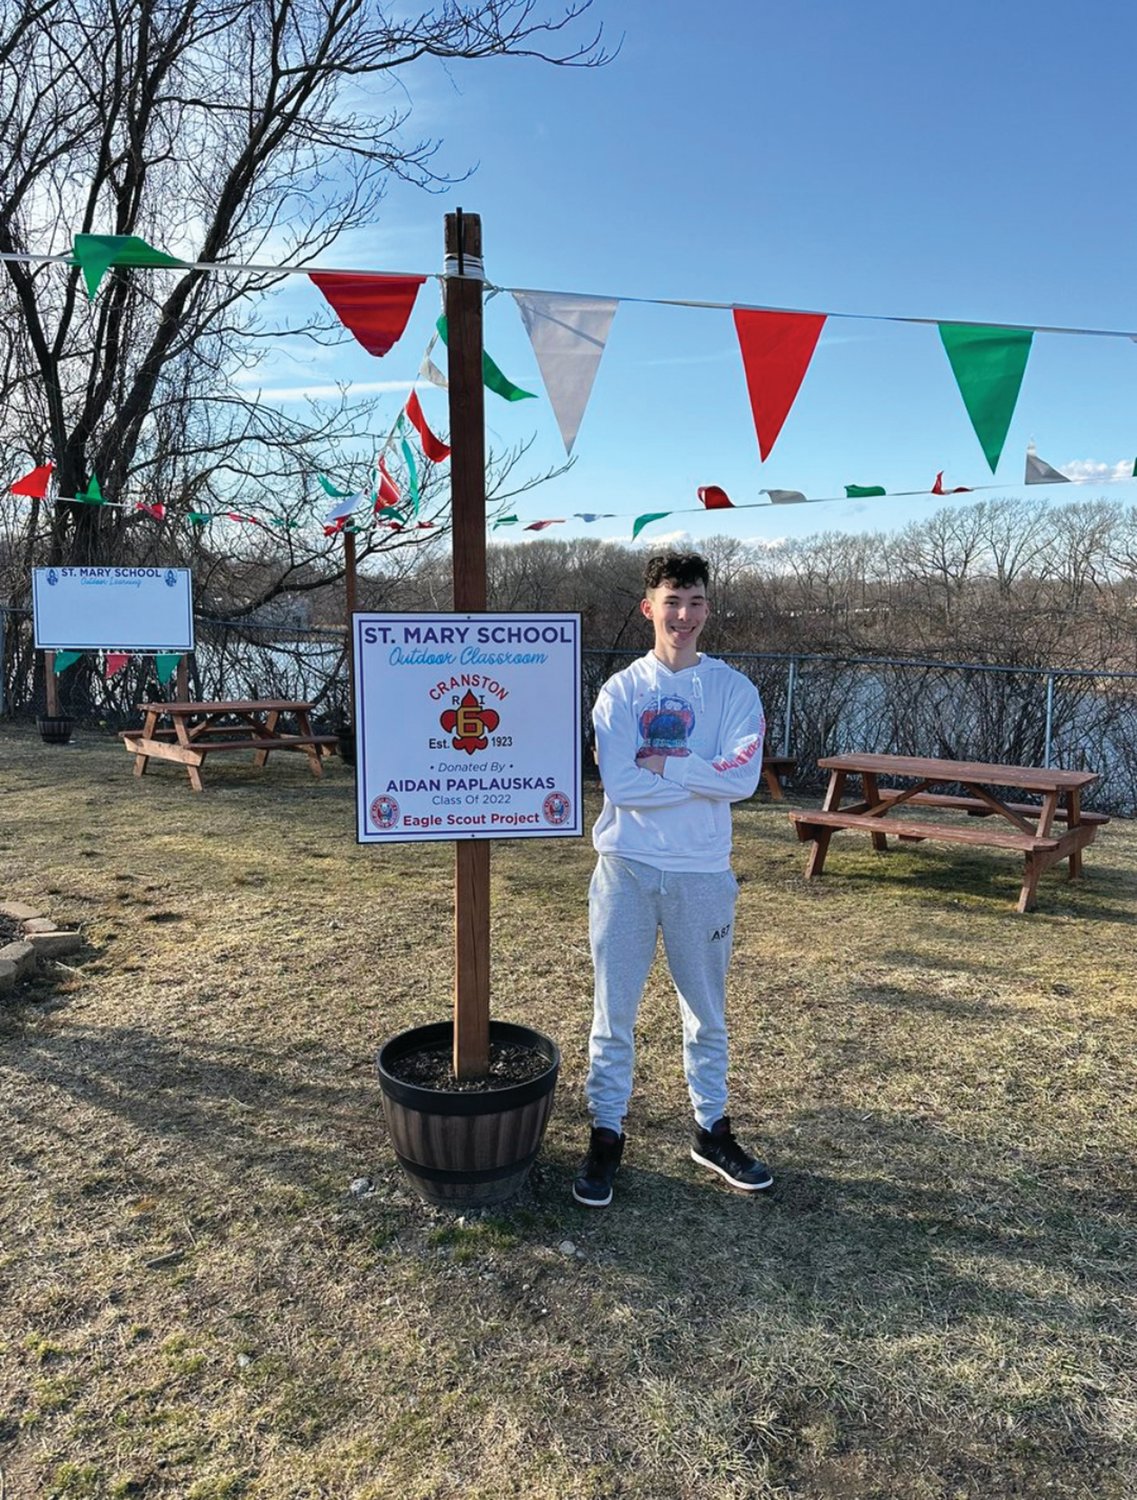 ALL FIXED UP: Eagle Scout Aidan Paplauskas posed for a photo with the freshly scrubbed outdoor classroom sign at St. Mary’s School. He built the classroom and erected the sign. The sign was vandalized, but Paplauskas went to work immediately cleaning up the site.